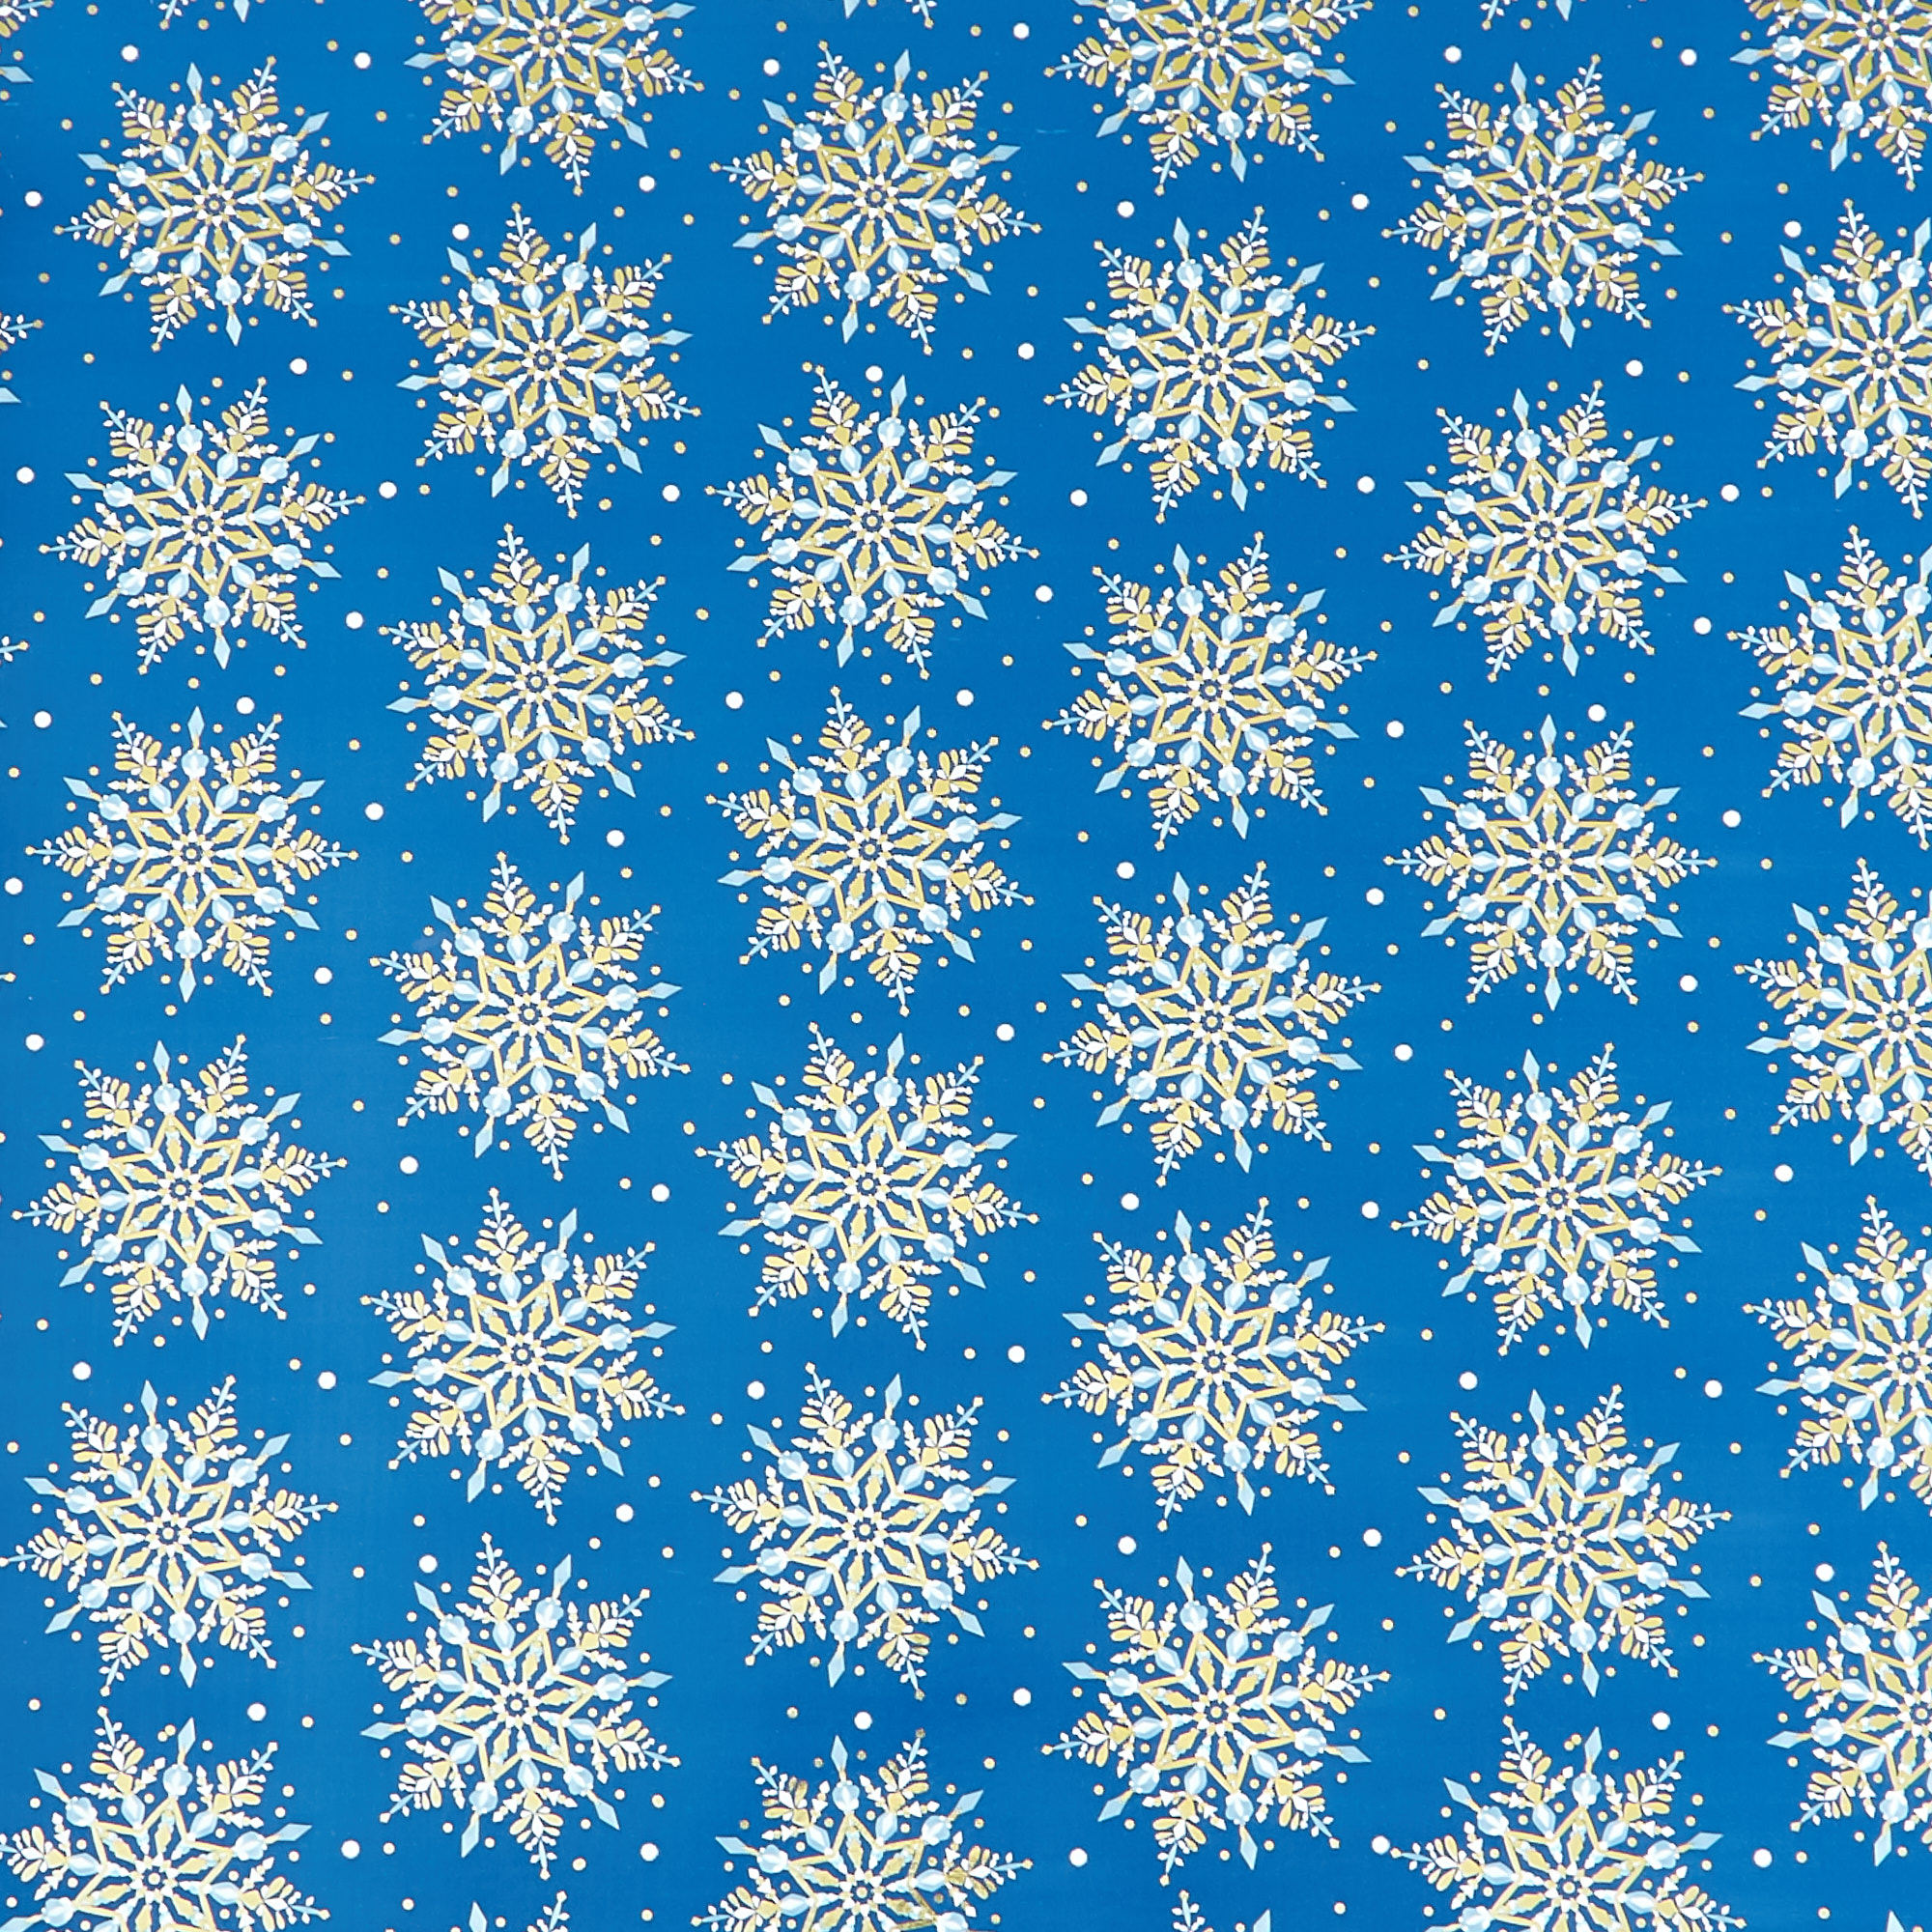 Blue Snowflakes Christmas Wrapping Paper - 4 Rolls